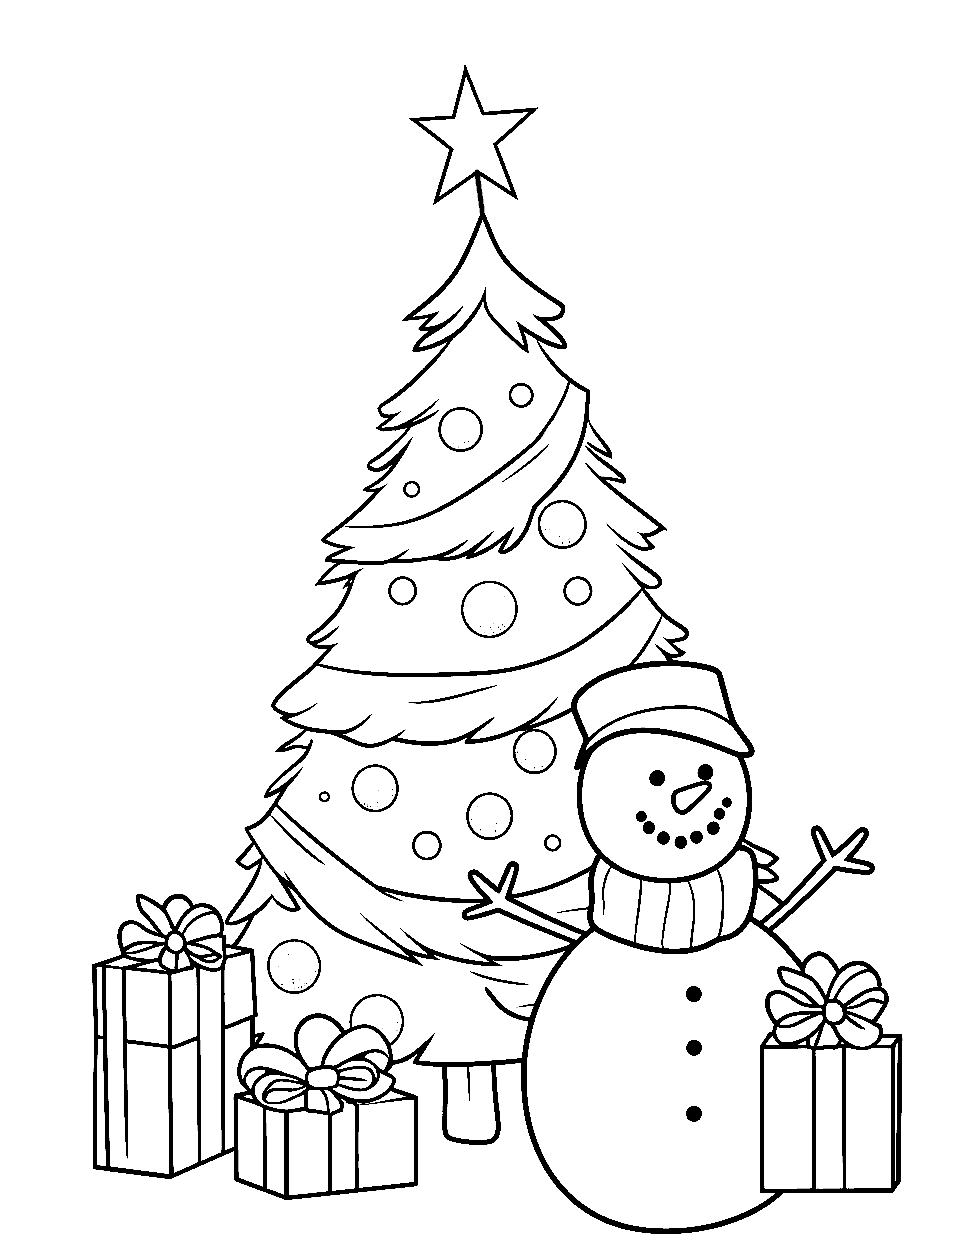 Snowman and the Festive Tree Coloring Page - A smiling snowman wearing a top hat, standing next to a festive Christmas tree.